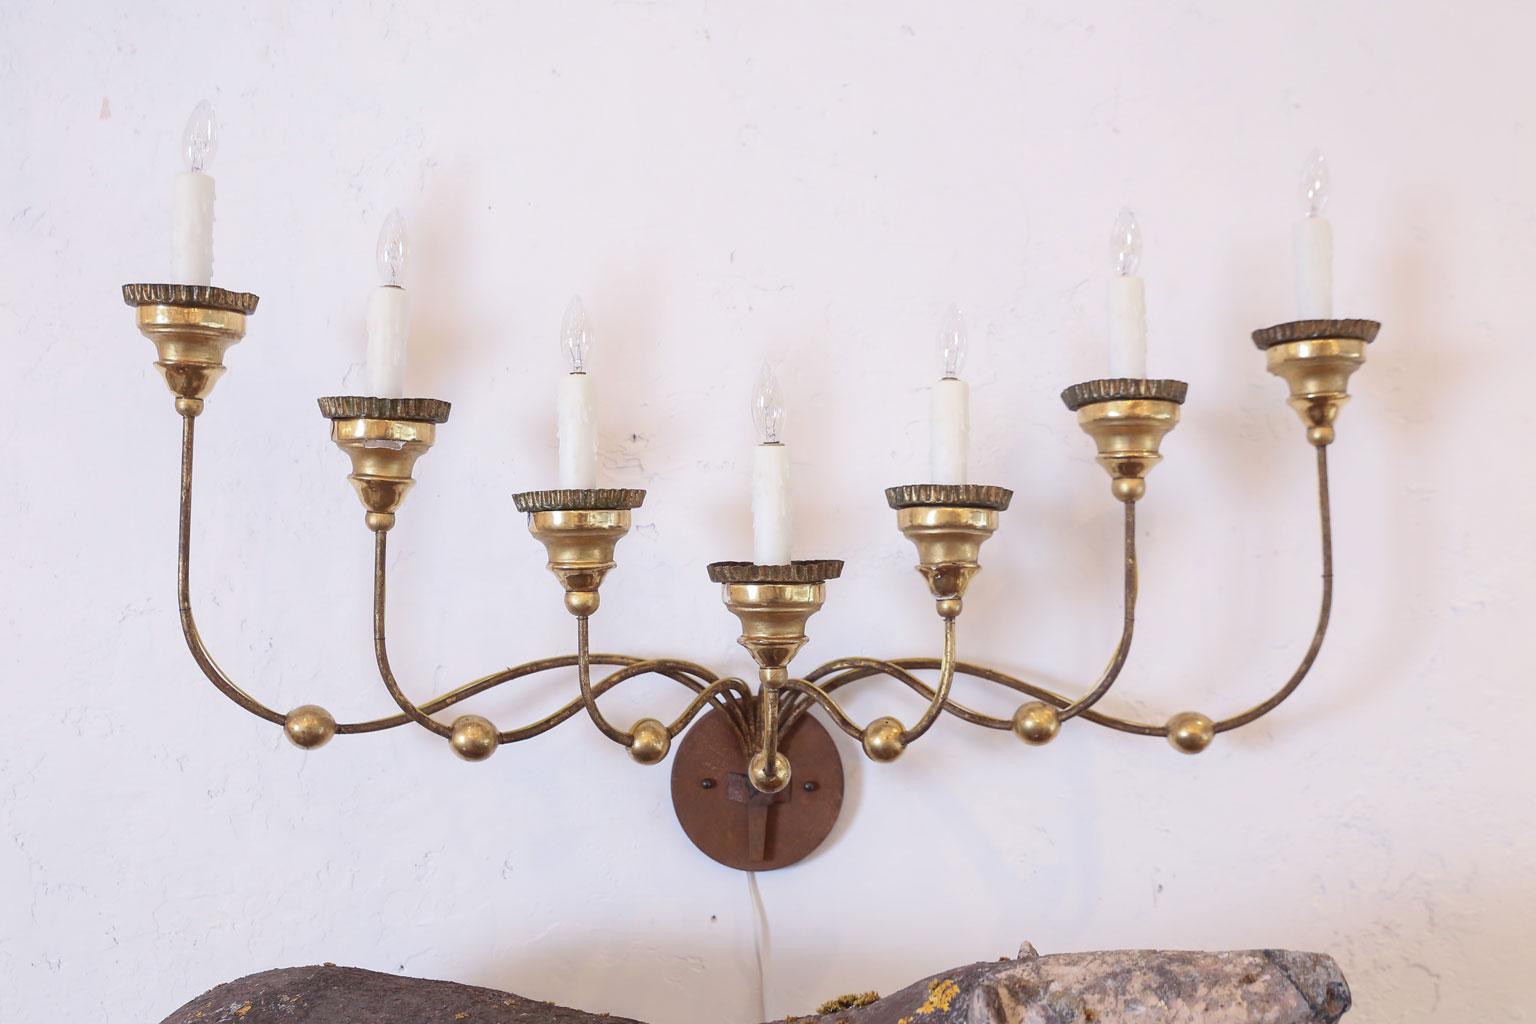 French Provincial Seven-Arm Gilt-Iron Sconce